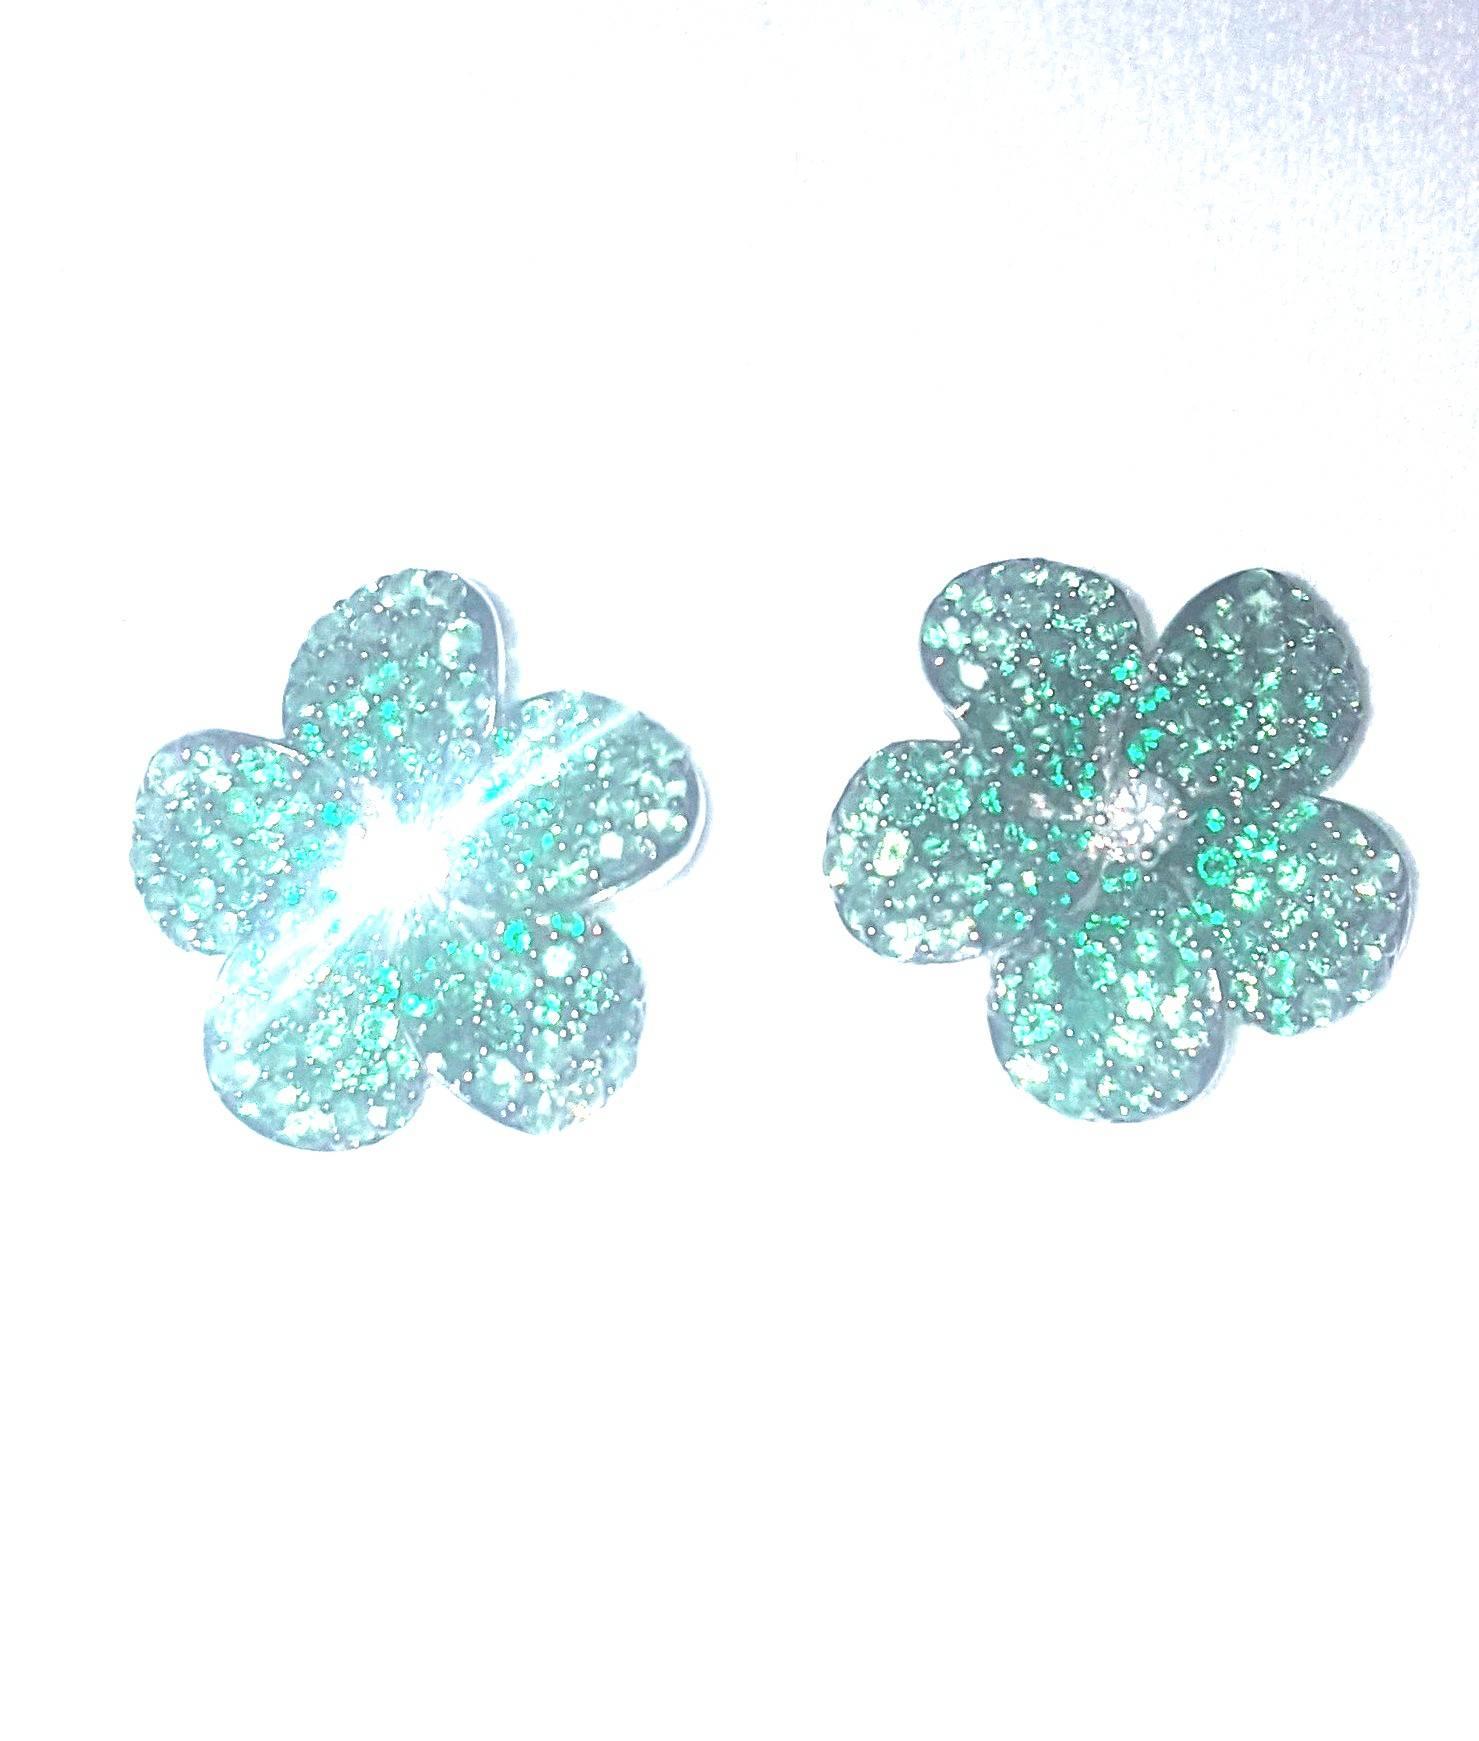 Nature motifs have been a jewelry design staple for centuries.  These stunningly tailored pierced earrings depict a five petal flower encrusted in green tsavorites.  A four prong set round white diamond centers each flower.  Tsavorites have a